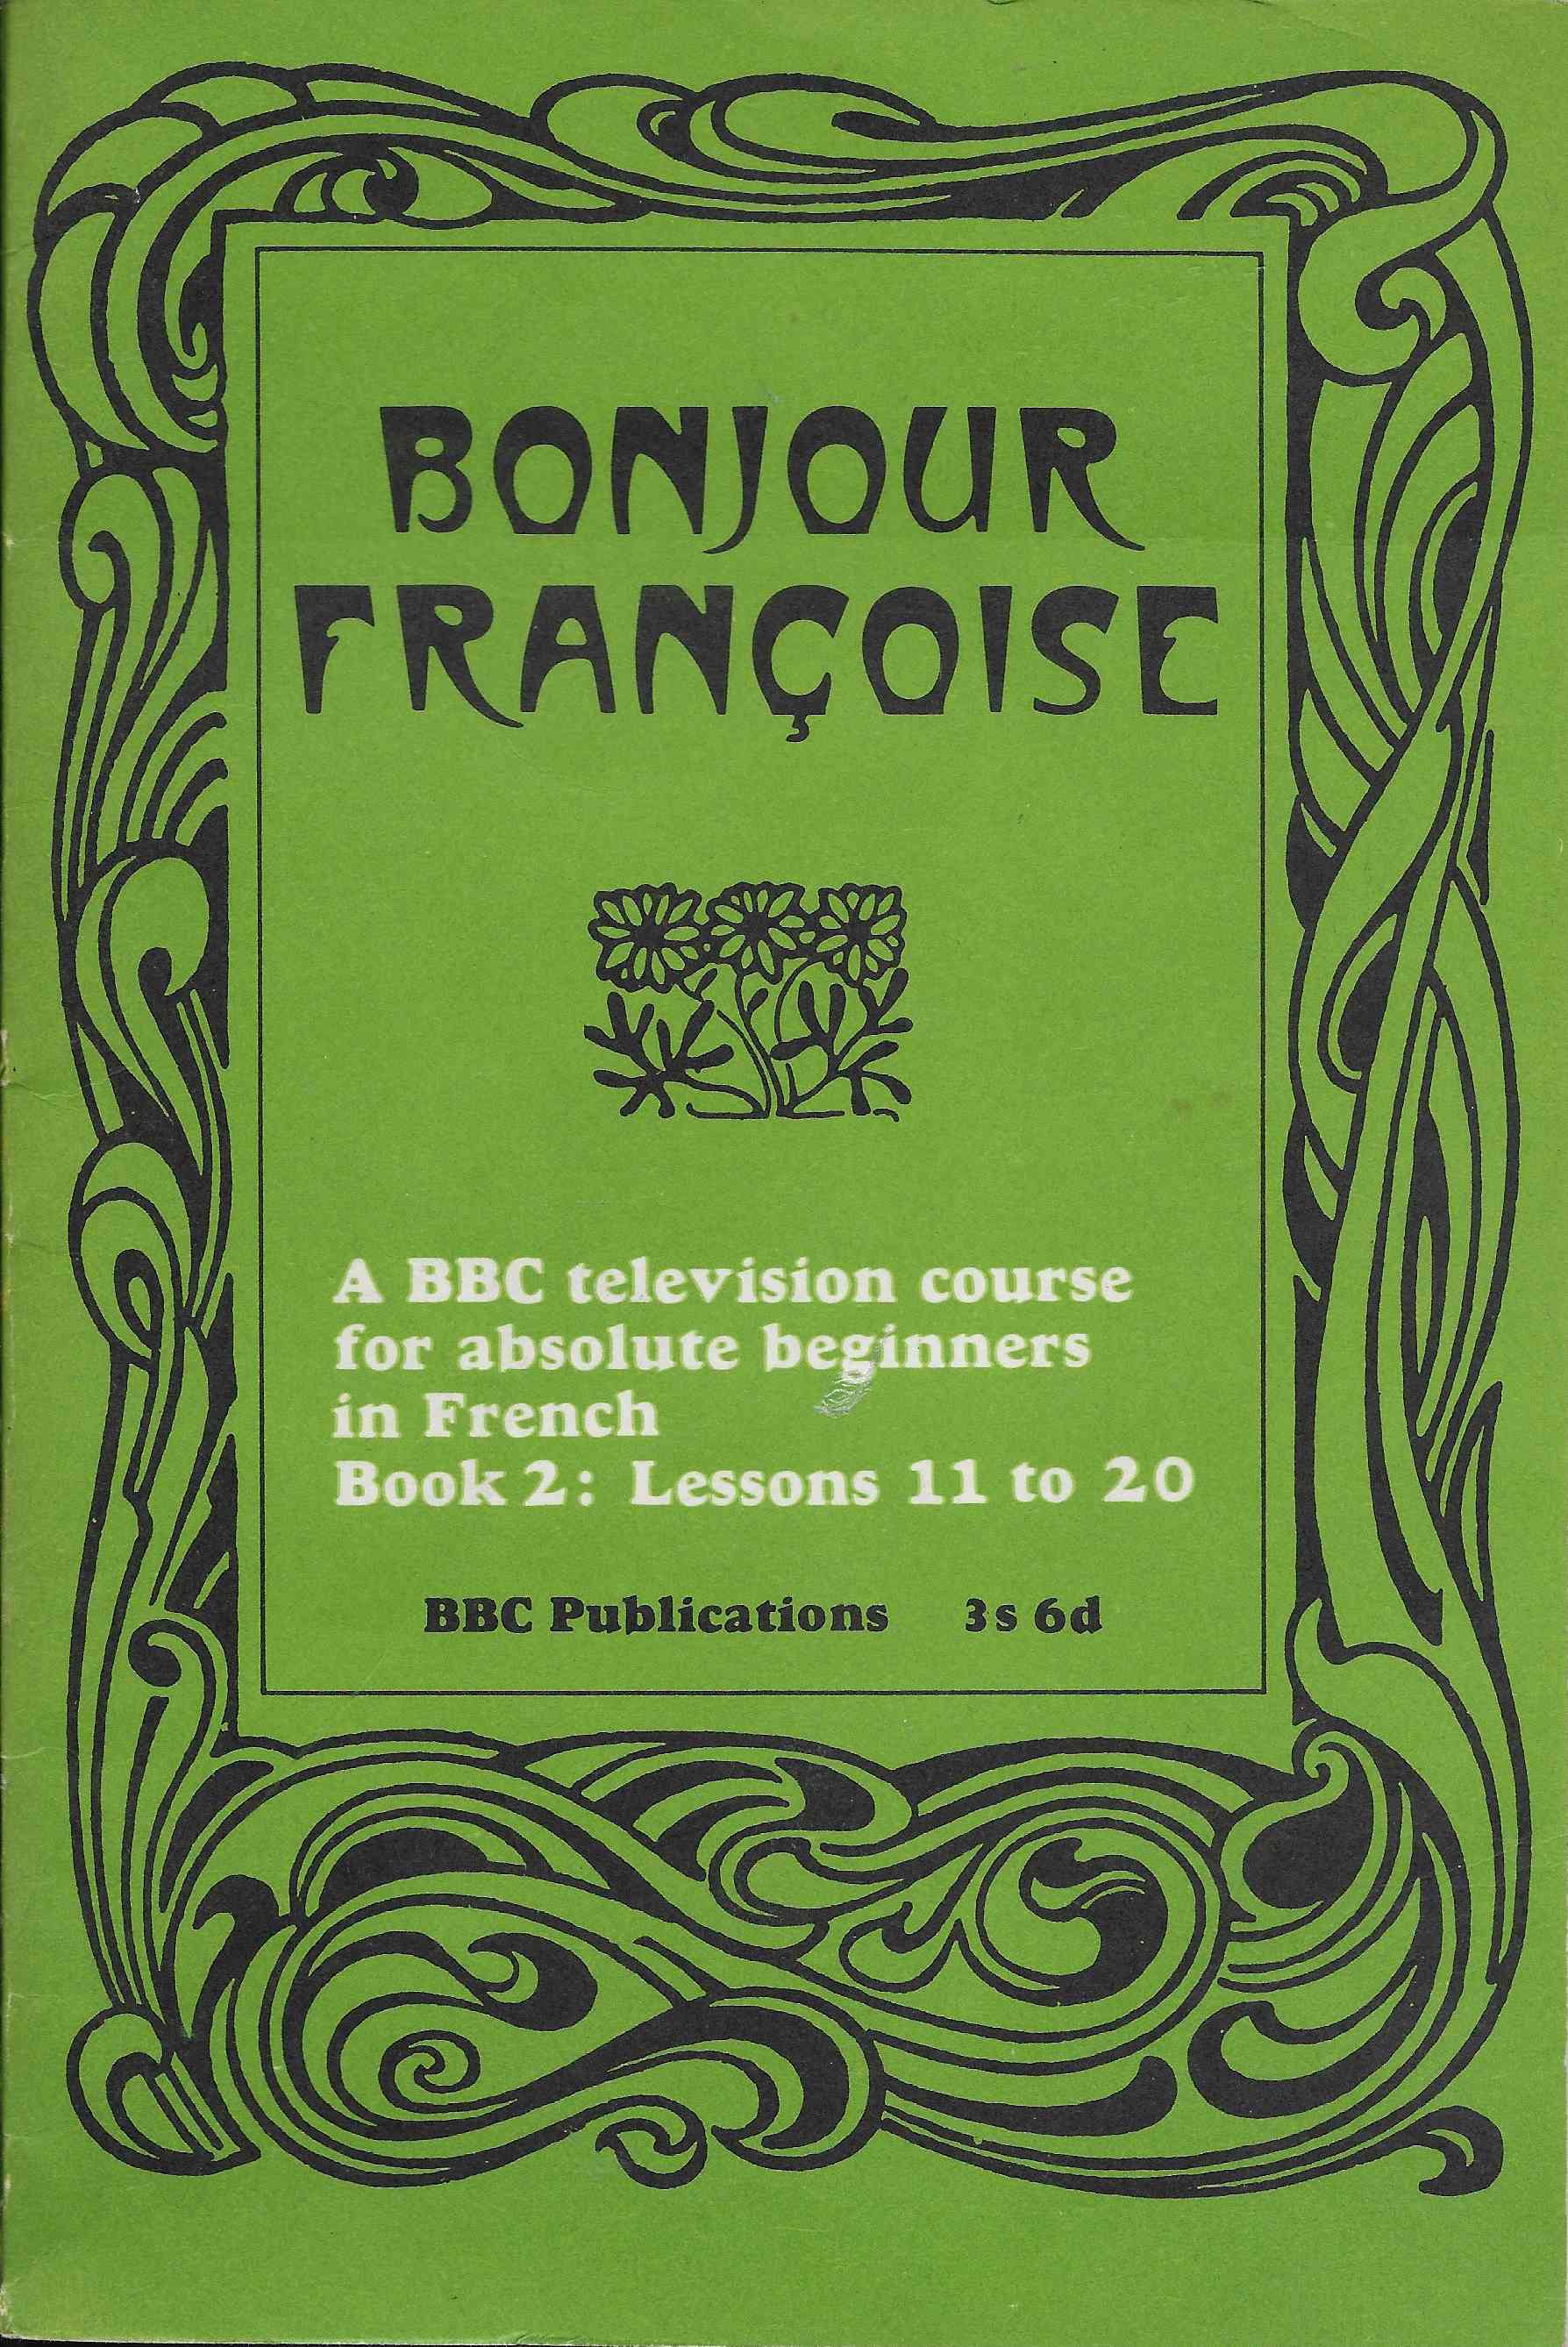 Picture of books-OP 43 Bonjour Francoise - Book 2 by artist Michel Faure from the BBC books - Records and Tapes library